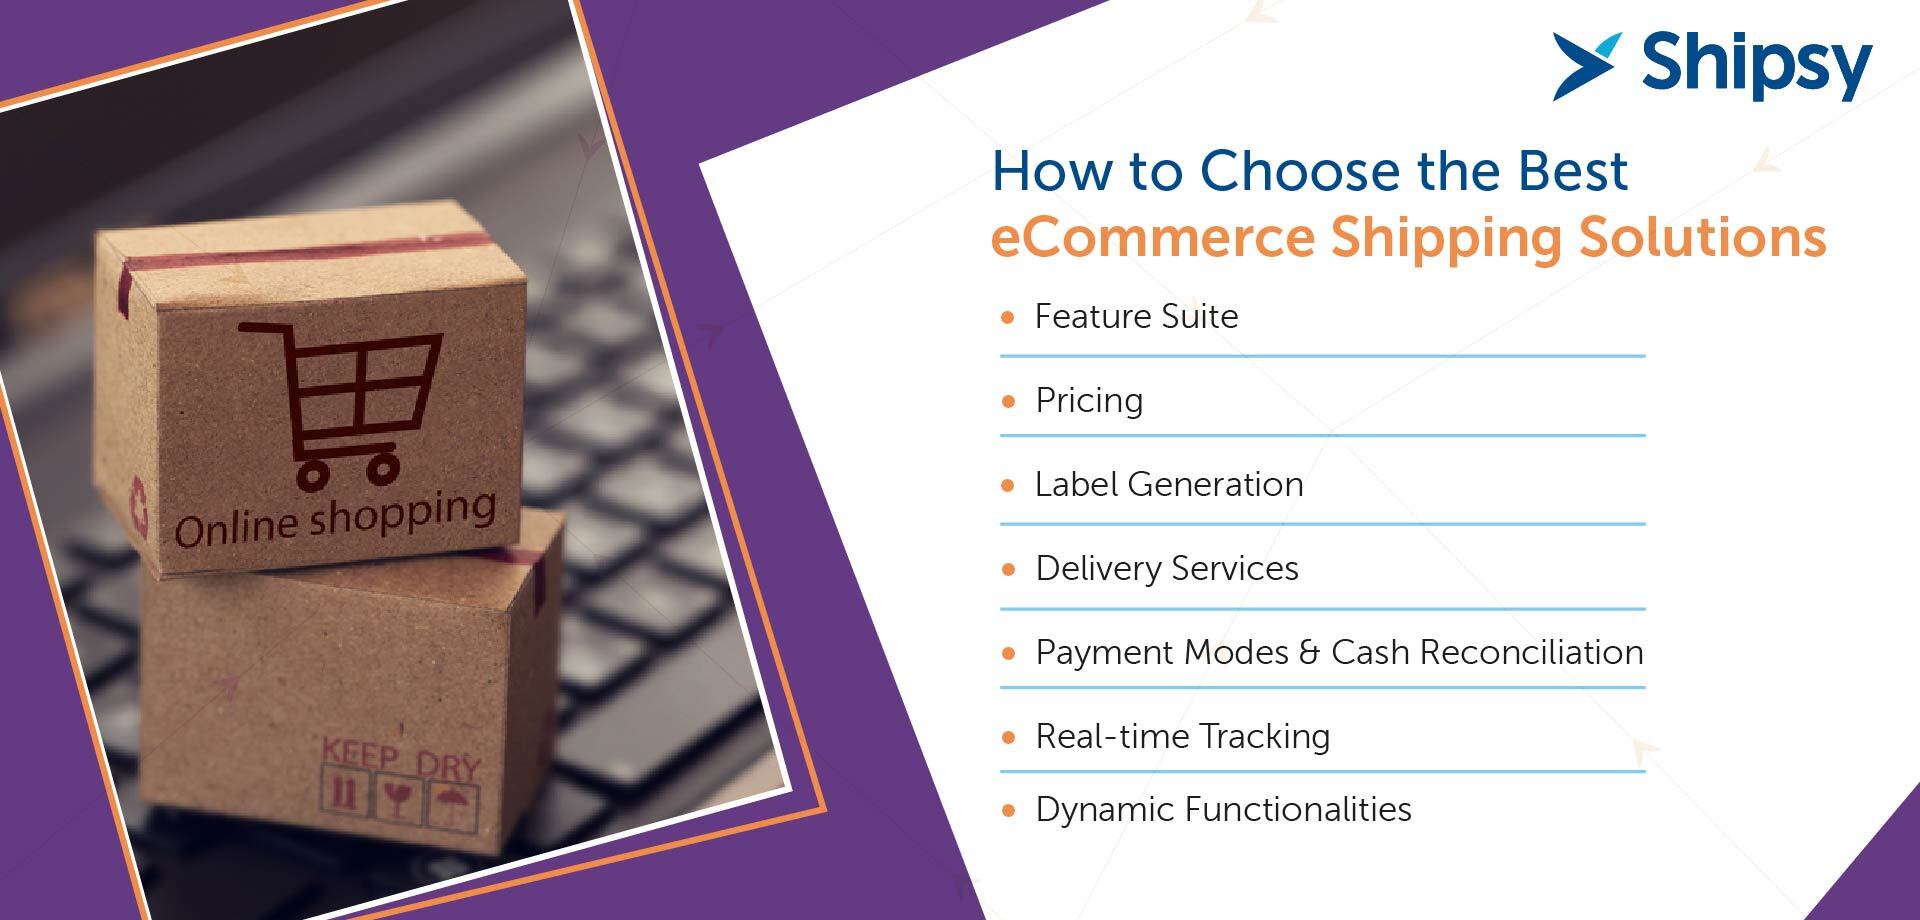 ecommerce shipping solution features